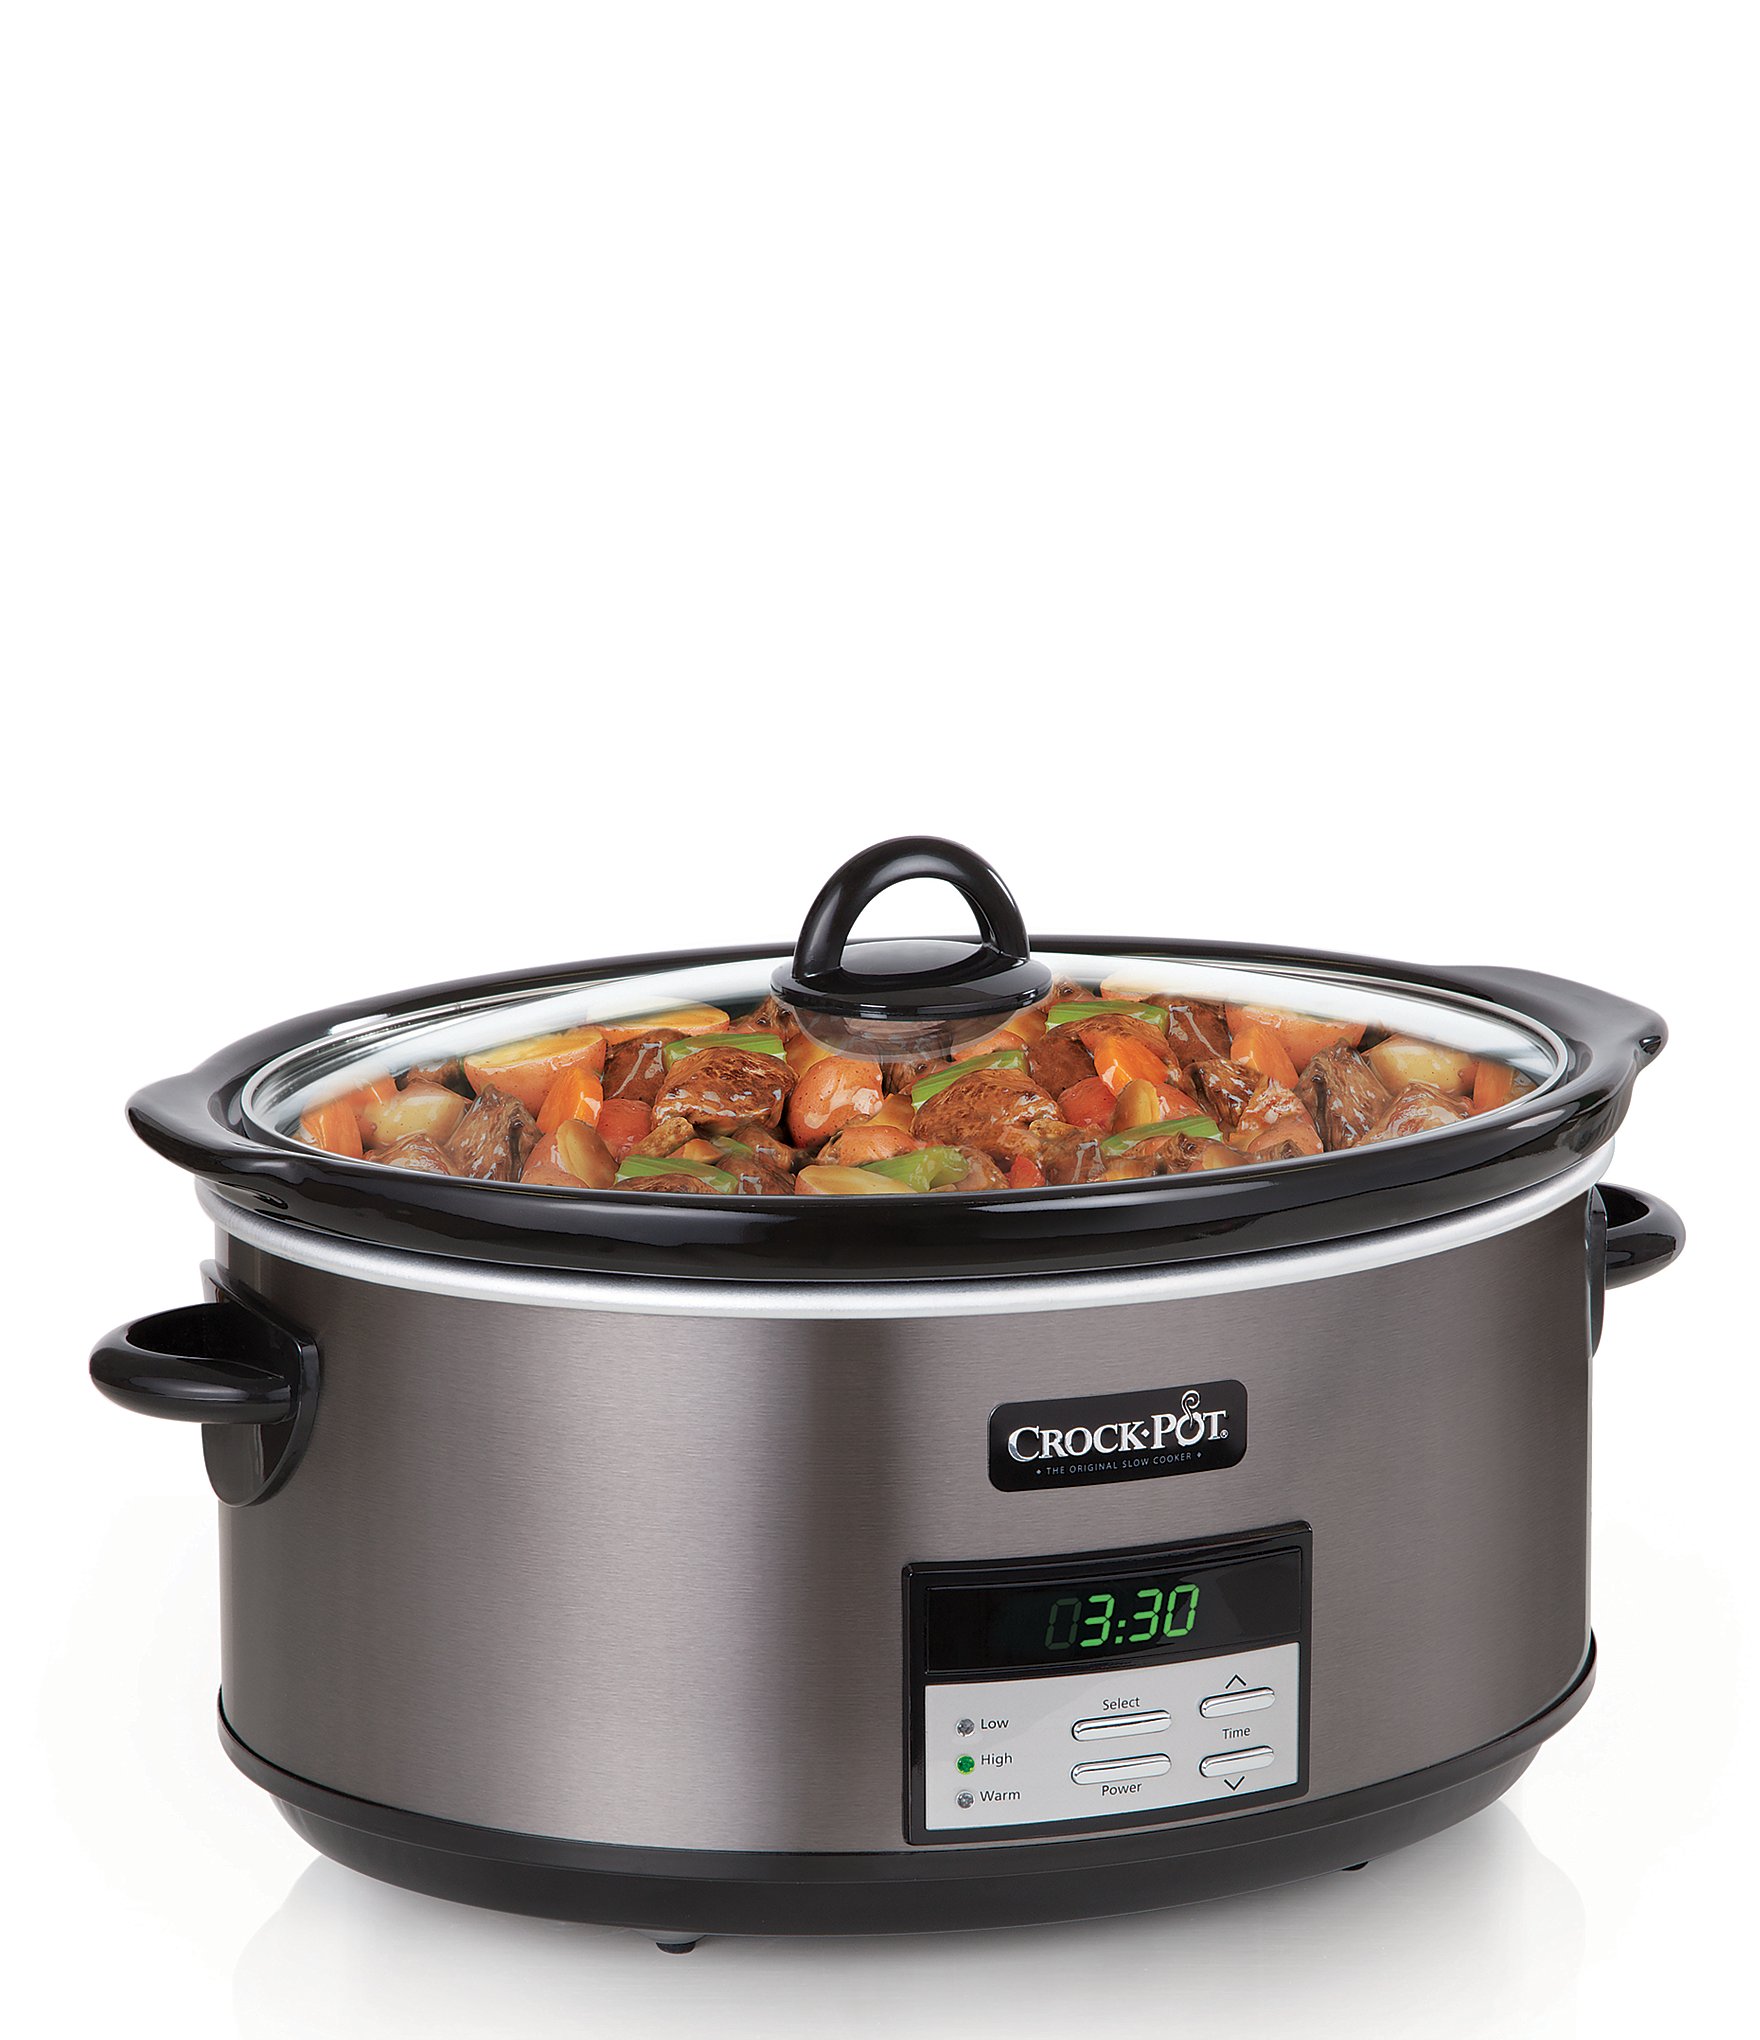 https://dimg.dillards.com/is/image/DillardsZoom/zoom/crock-pot-stainless-collection-8-quart-programmable-slow-cooker/05148343_zi_stainless_steel.jpg